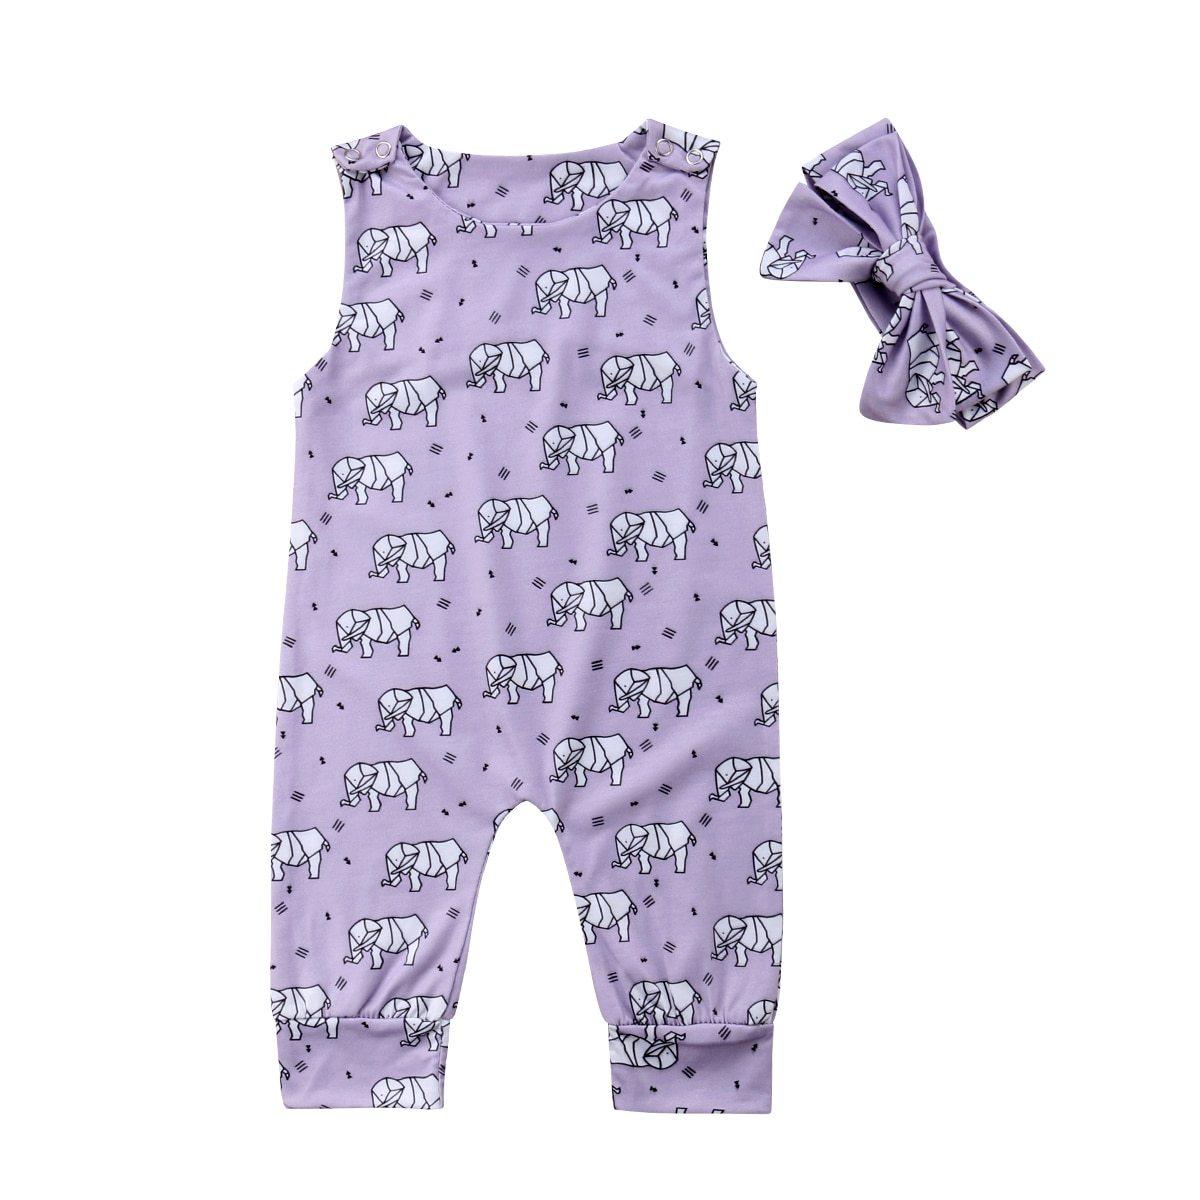 Origami For Kids Clothes Toddler Ba Girl Purple Origami Elephant Print Romper Jumpsuit